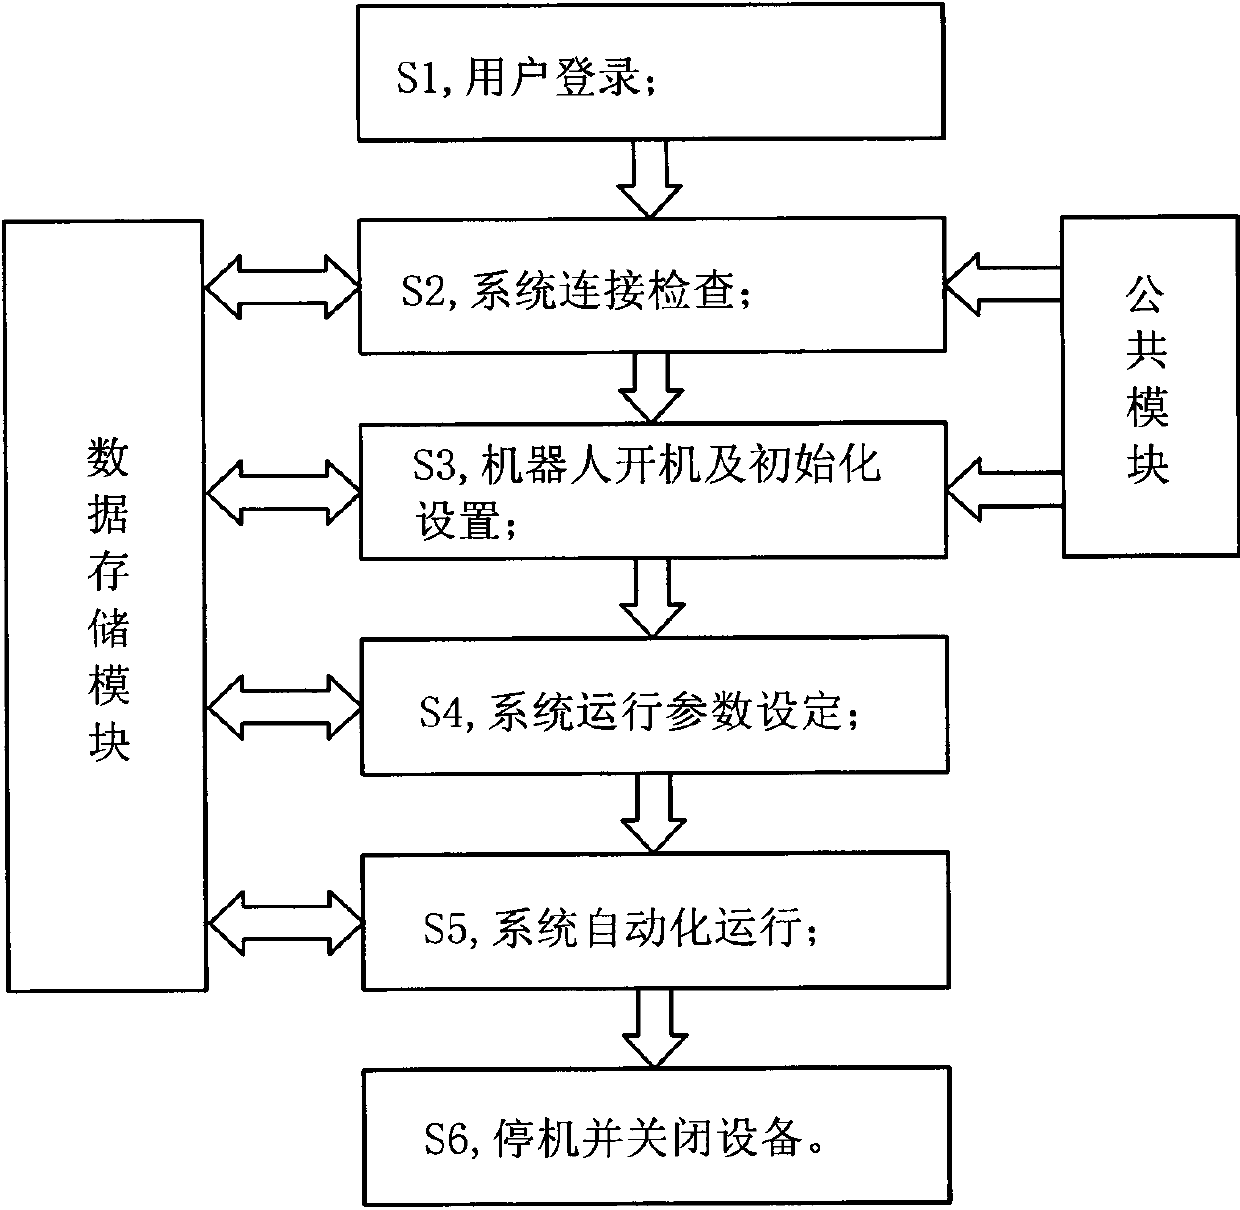 Automatic feeding, testing and sorting system and operation method thereof